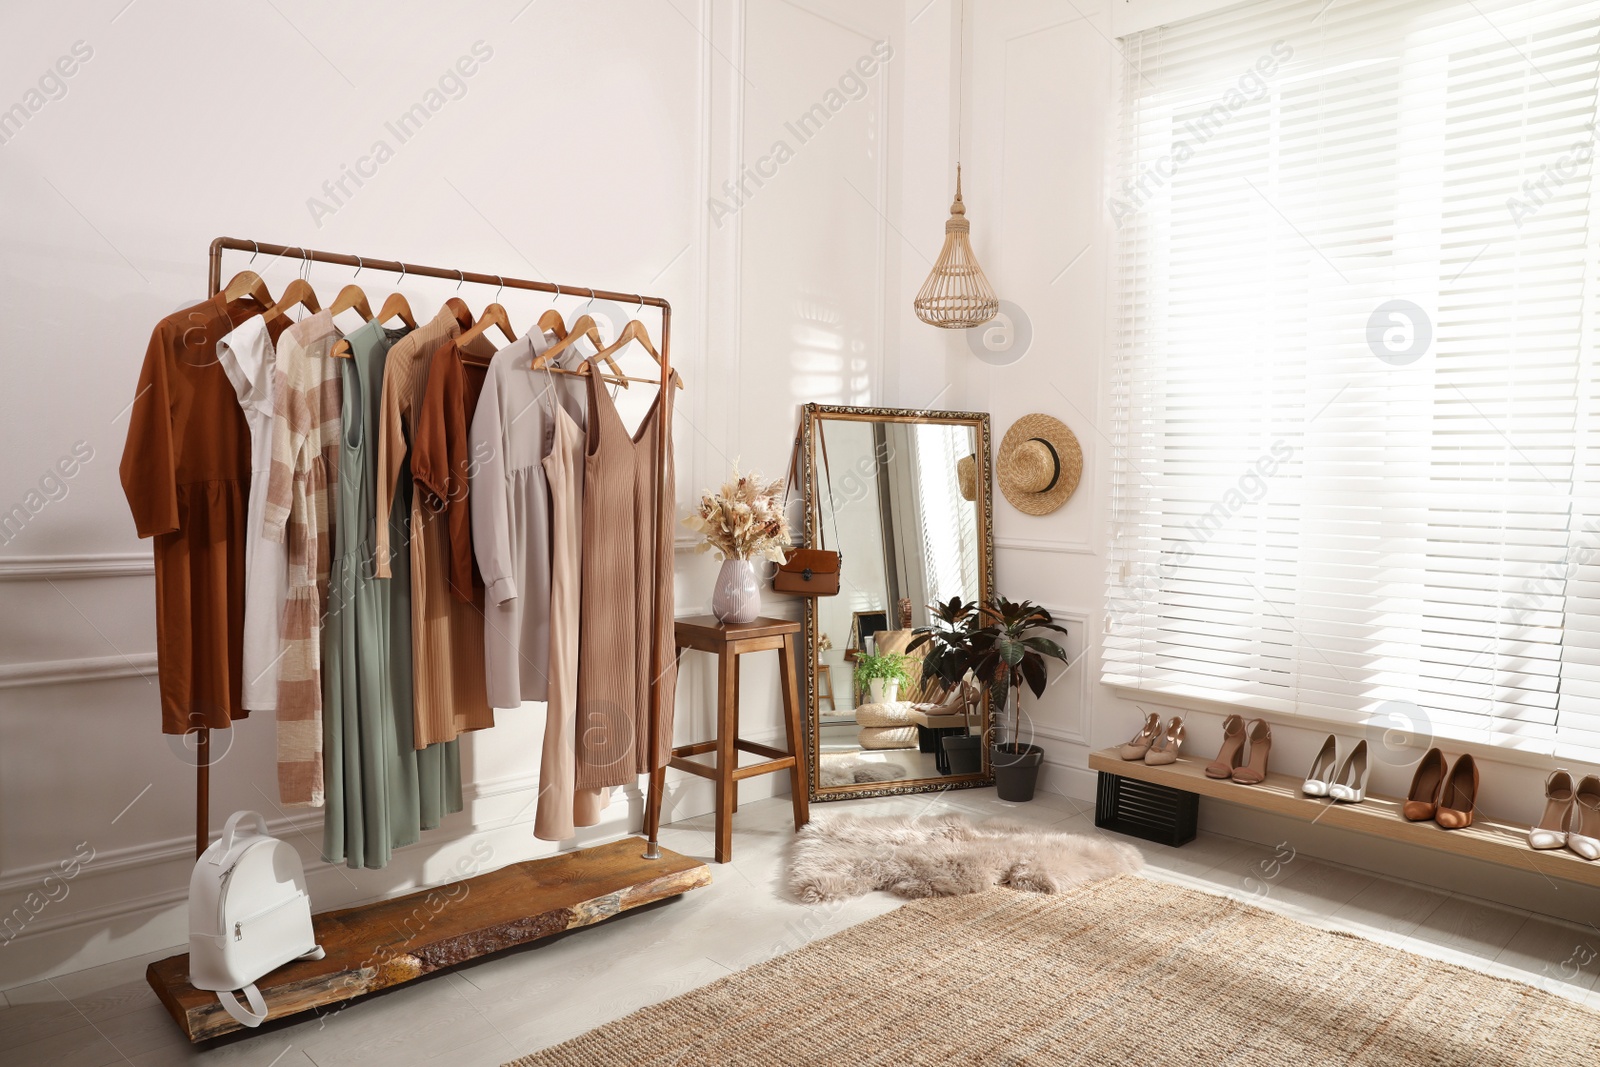 Photo of Dressing room interior with stylish clothes, shoes and accessories